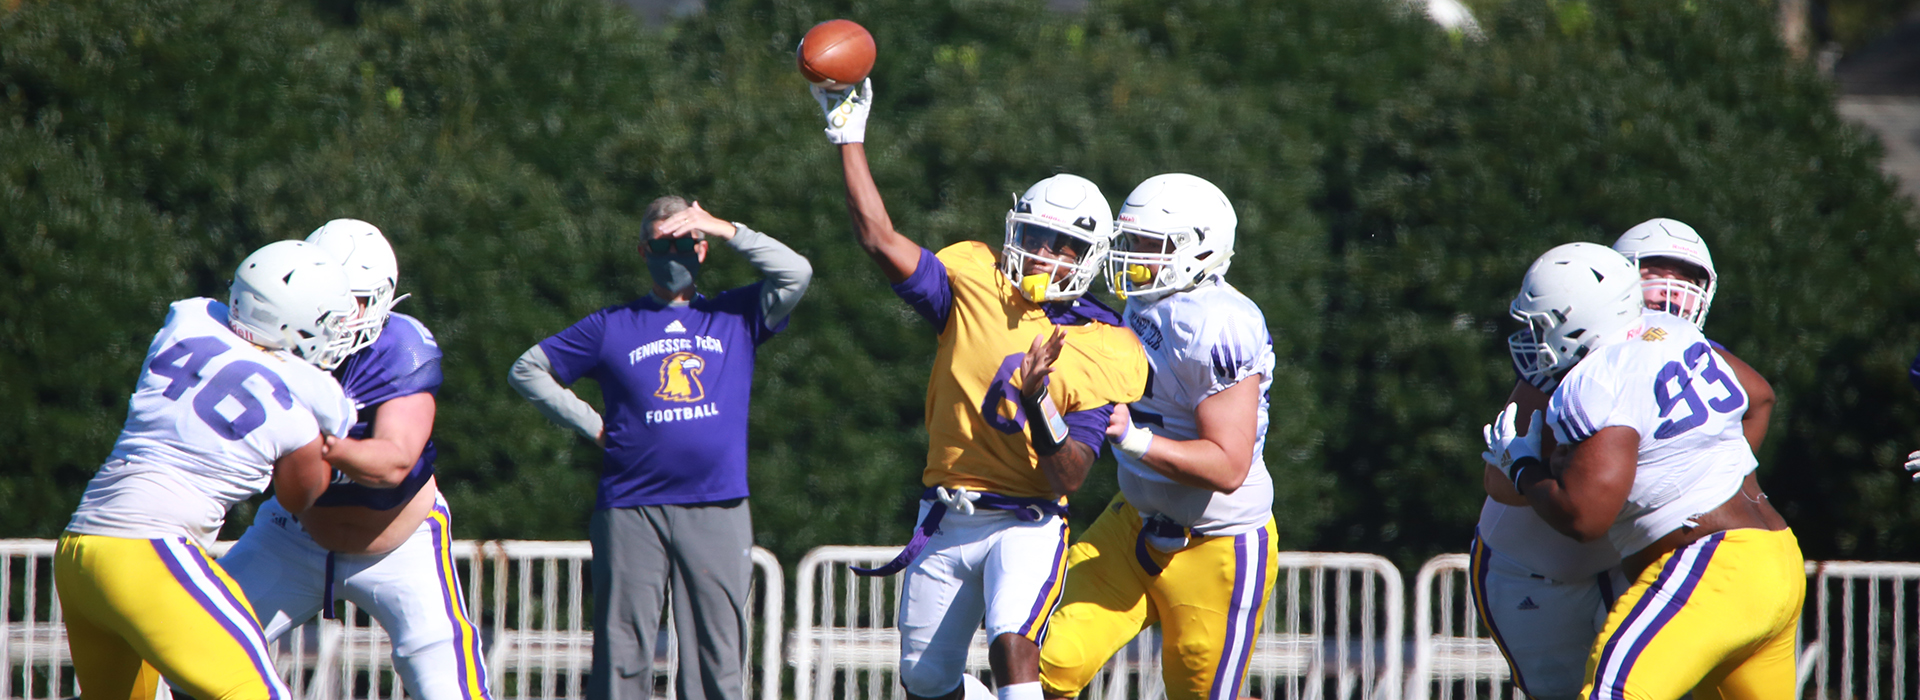 Still football time in Tennessee -- Tech football opening up spring season Sunday